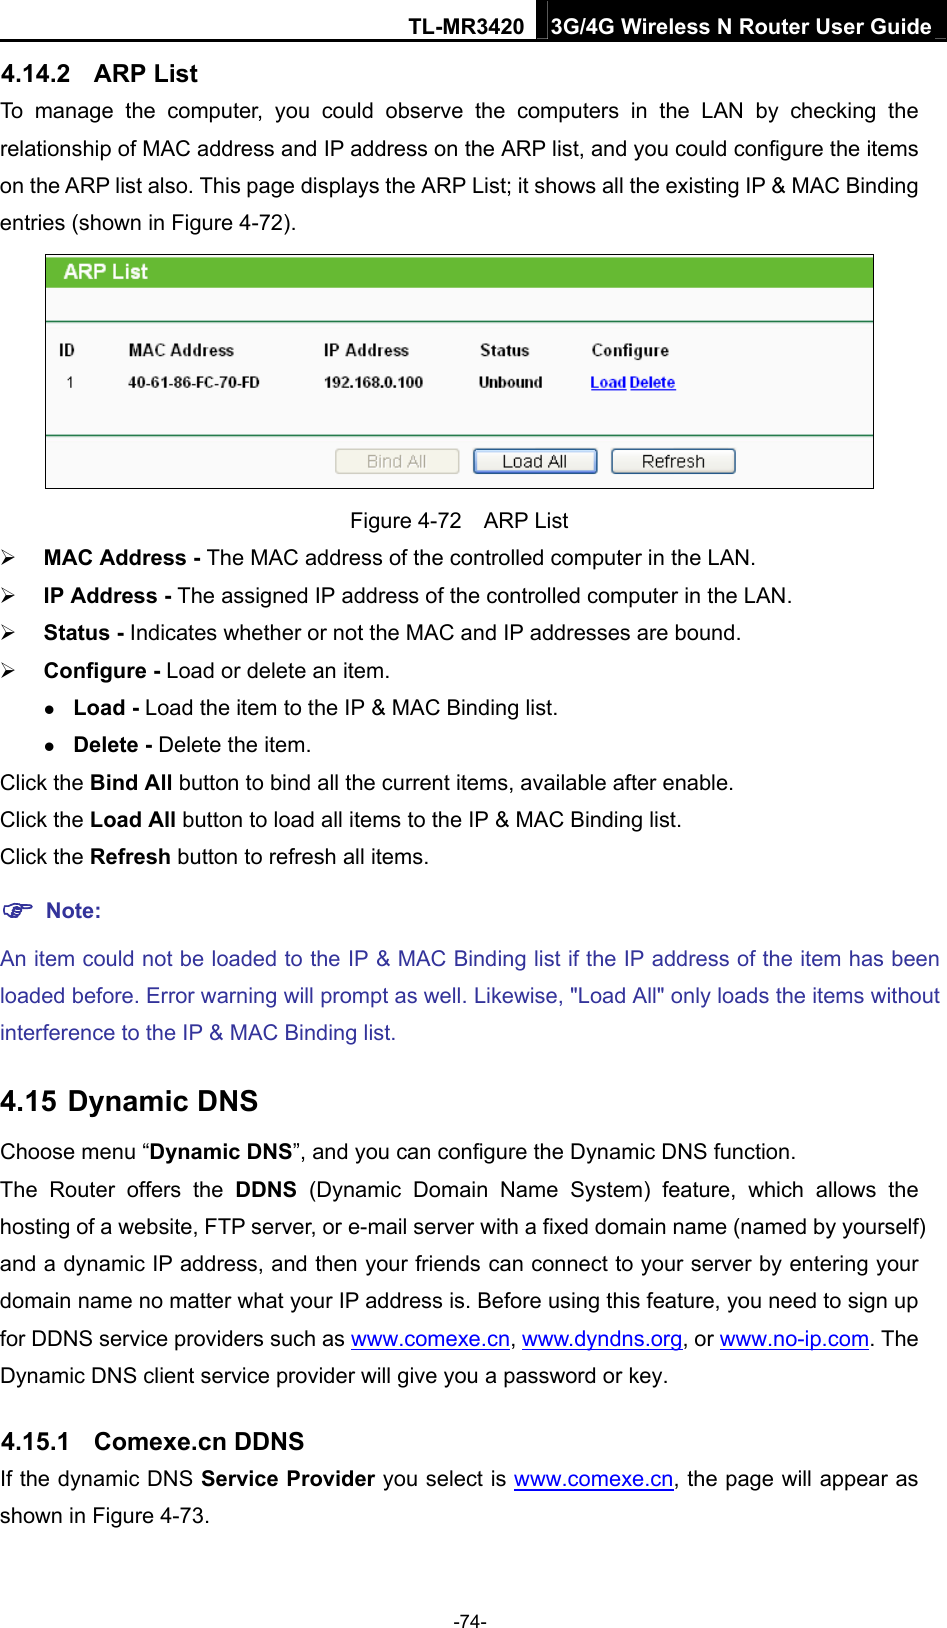 TL-MR3420 3G/4G Wireless N Router User Guide 4.14.2  ARP List To manage the computer, you could observe the computers in the LAN by checking the relationship of MAC address and IP address on the ARP list, and you could configure the items on the ARP list also. This page displays the ARP List; it shows all the existing IP &amp; MAC Binding entries (shown in Figure 4-72).    Figure 4-72  ARP List  MAC Address - The MAC address of the controlled computer in the LAN.    IP Address - The assigned IP address of the controlled computer in the LAN.    Status - Indicates whether or not the MAC and IP addresses are bound.  Configure - Load or delete an item.    Load - Load the item to the IP &amp; MAC Binding list.    Delete - Delete the item.   Click the Bind All button to bind all the current items, available after enable. Click the Load All button to load all items to the IP &amp; MAC Binding list. Click the Refresh button to refresh all items.  Note: An item could not be loaded to the IP &amp; MAC Binding list if the IP address of the item has been loaded before. Error warning will prompt as well. Likewise, &quot;Load All&quot; only loads the items without interference to the IP &amp; MAC Binding list. 4.15 Dynamic DNS Choose menu “Dynamic DNS”, and you can configure the Dynamic DNS function.   The Router offers the DDNS (Dynamic Domain Name System) feature, which allows the hosting of a website, FTP server, or e-mail server with a fixed domain name (named by yourself) and a dynamic IP address, and then your friends can connect to your server by entering your domain name no matter what your IP address is. Before using this feature, you need to sign up for DDNS service providers such as www.comexe.cn, www.dyndns.org, or www.no-ip.com. The Dynamic DNS client service provider will give you a password or key. 4.15.1  Comexe.cn DDNS If the dynamic DNS Service Provider you select is www.comexe.cn, the page will appear as shown in Figure 4-73. -74- 